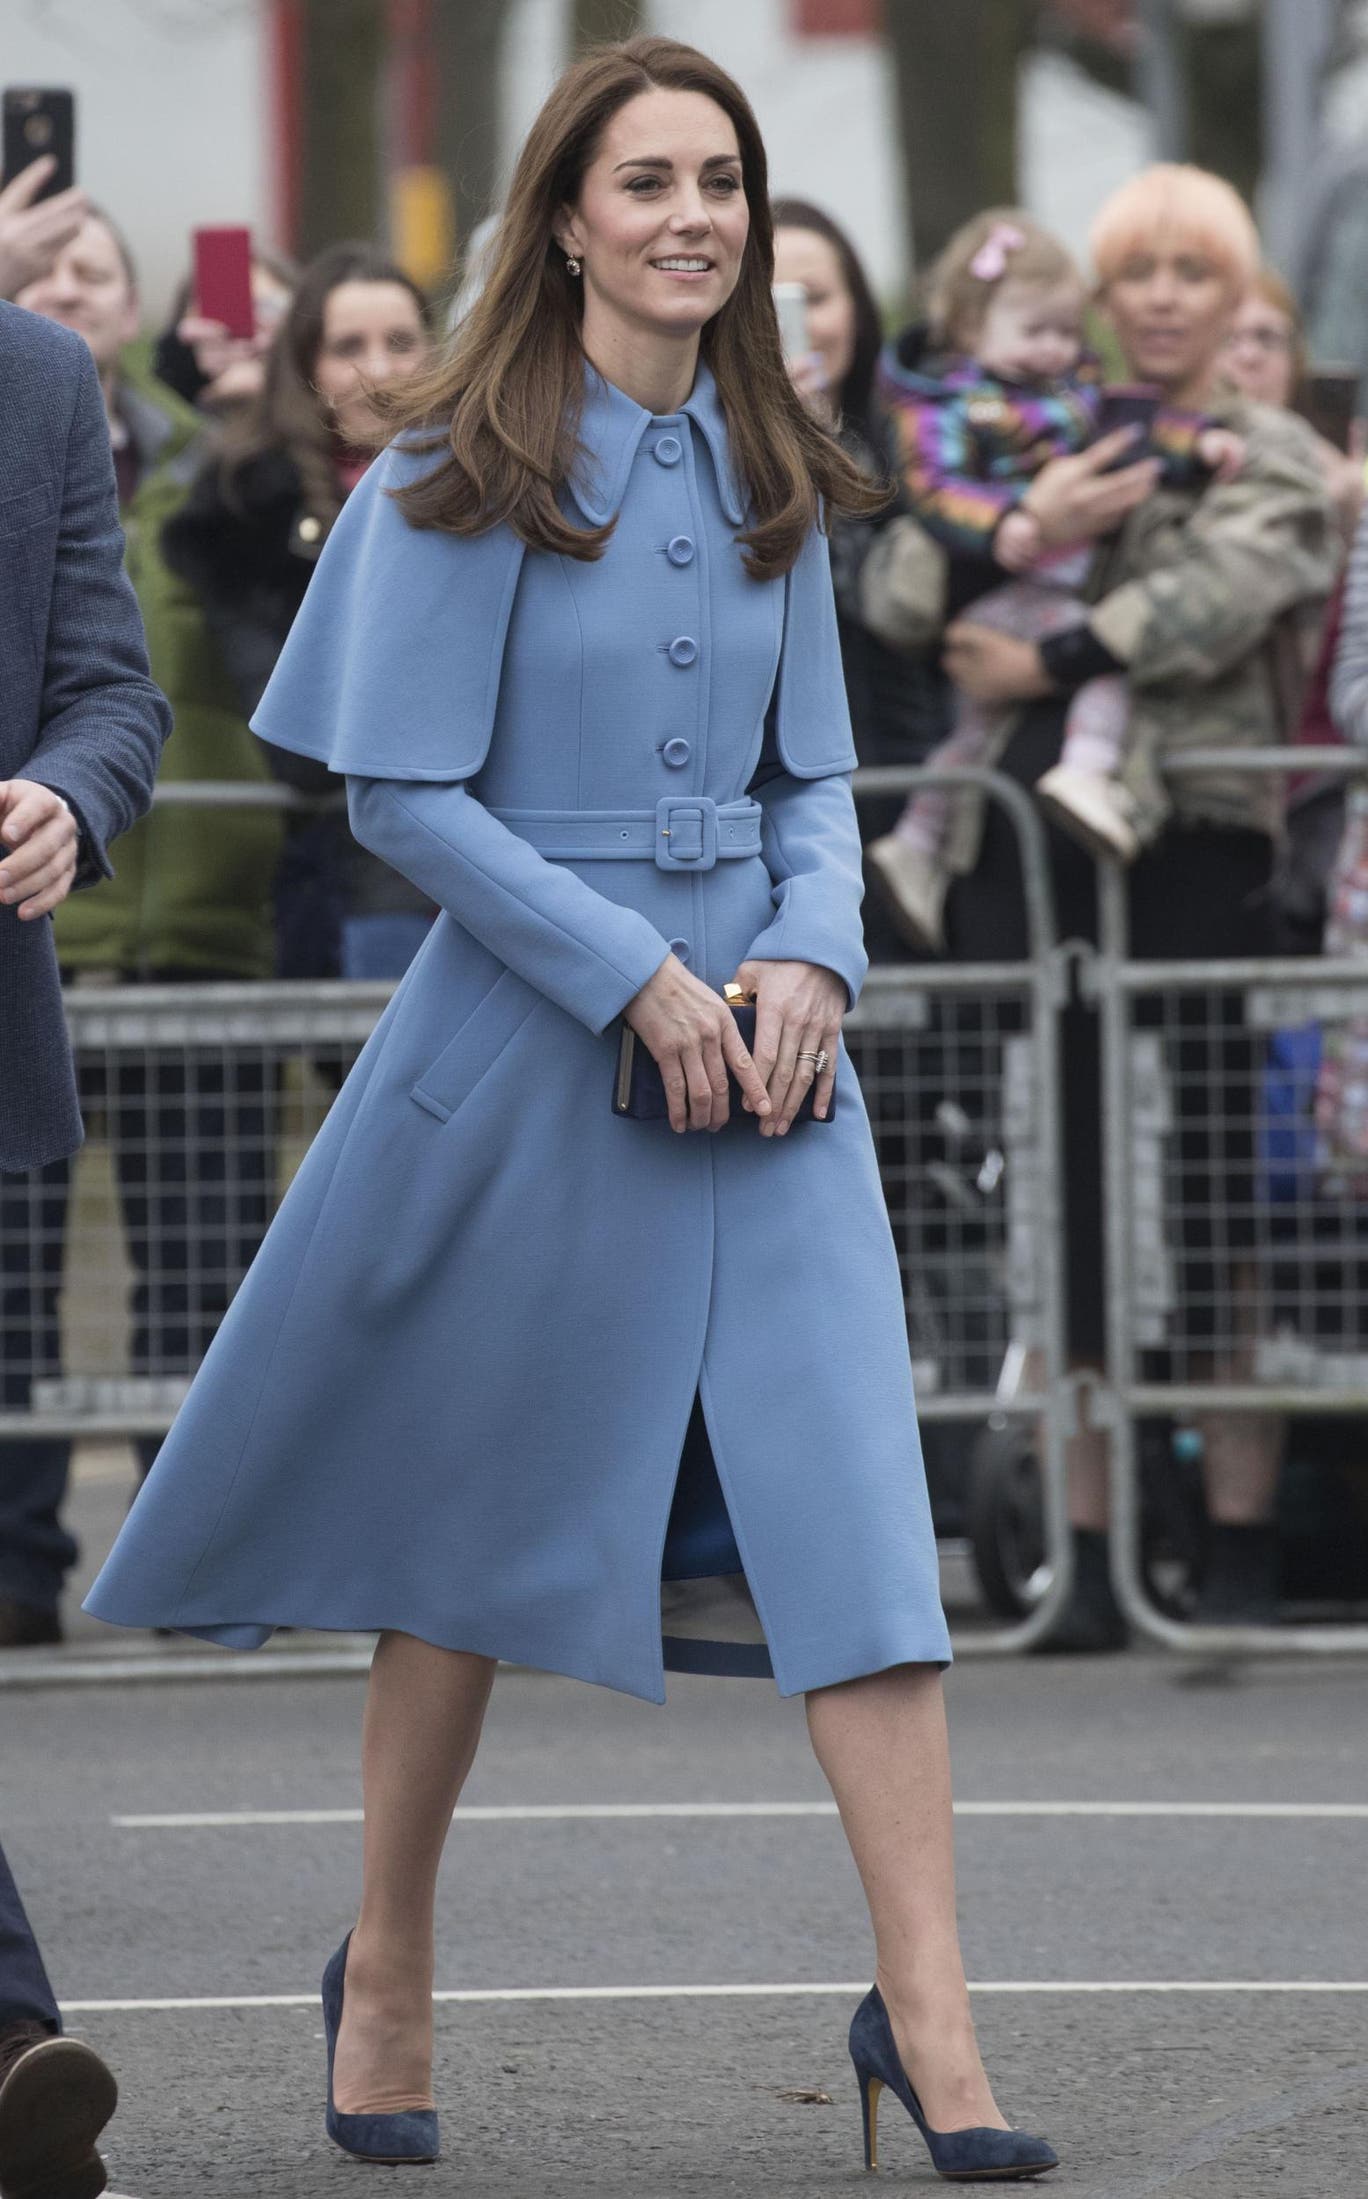 Kate arrived in a grey-blue coat